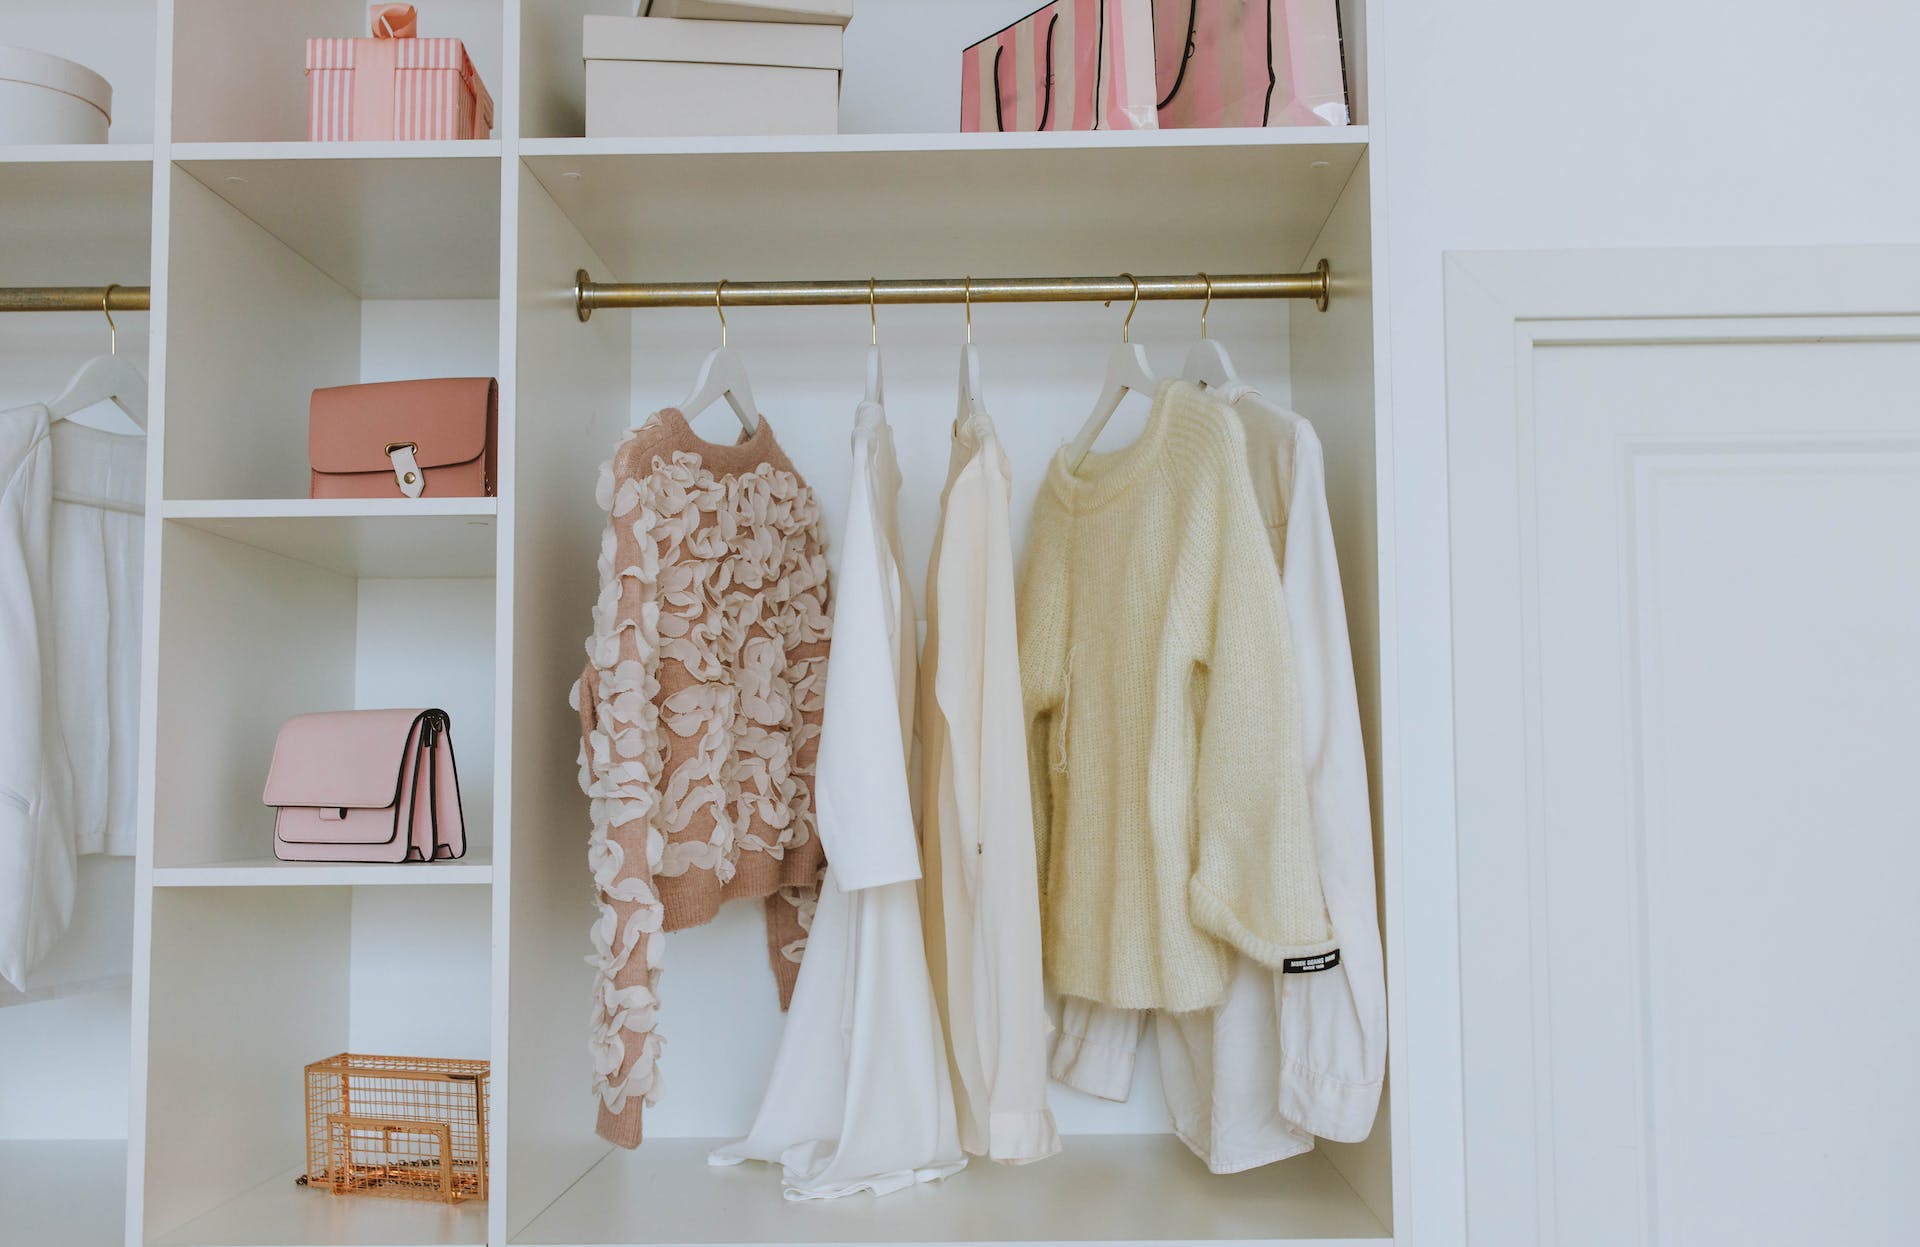 White wooden closet with clothes and other items | Source: Pexels